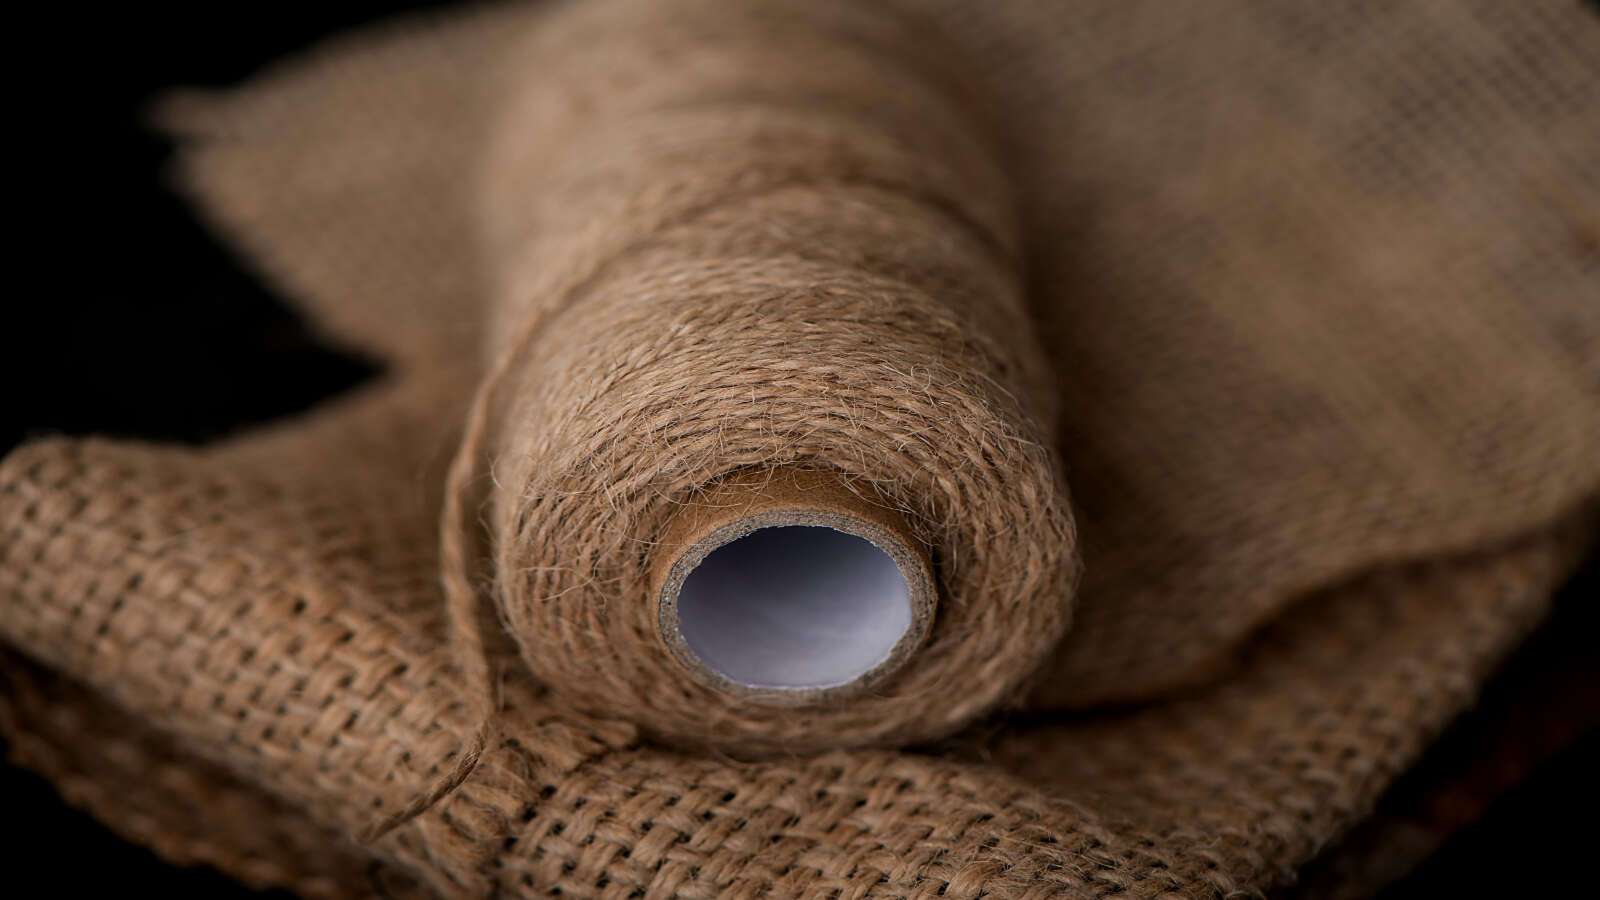 What Are The Many Uses of Jute Fibers?